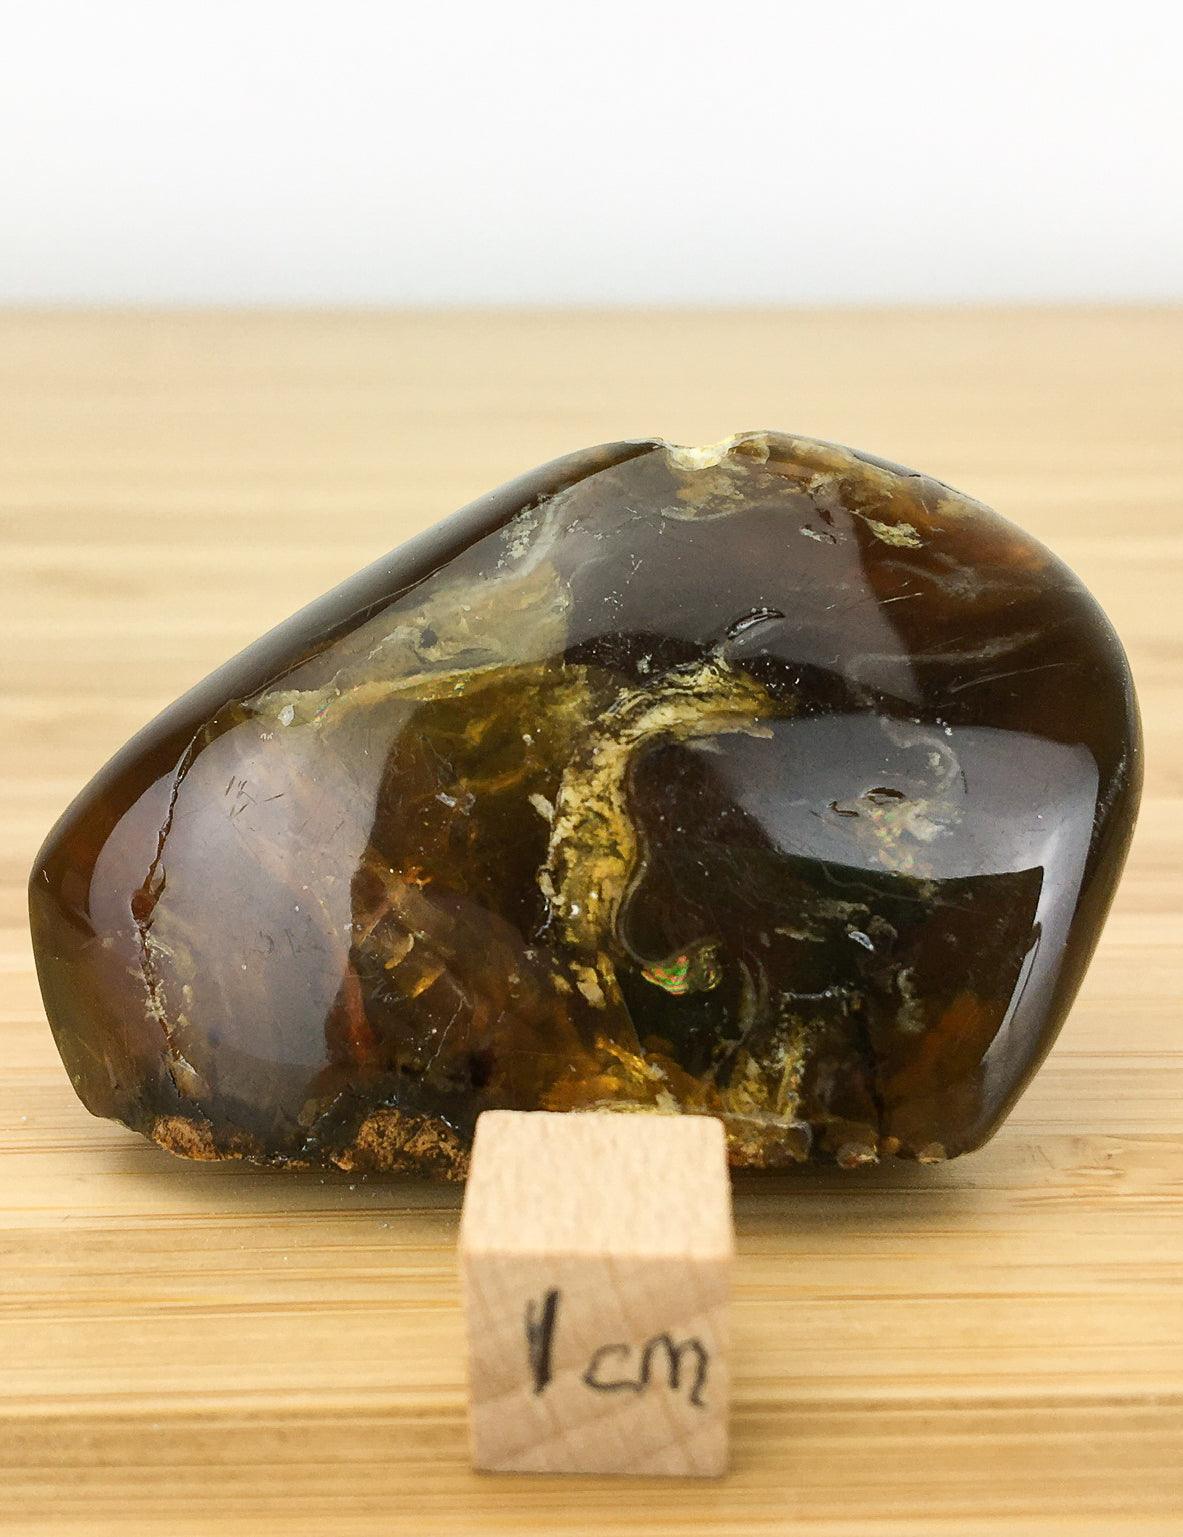 polished Amber from Sumatra. It is very translucent and an orangey brown. It is placed next to a 1cm cube. The sample is about 5cm